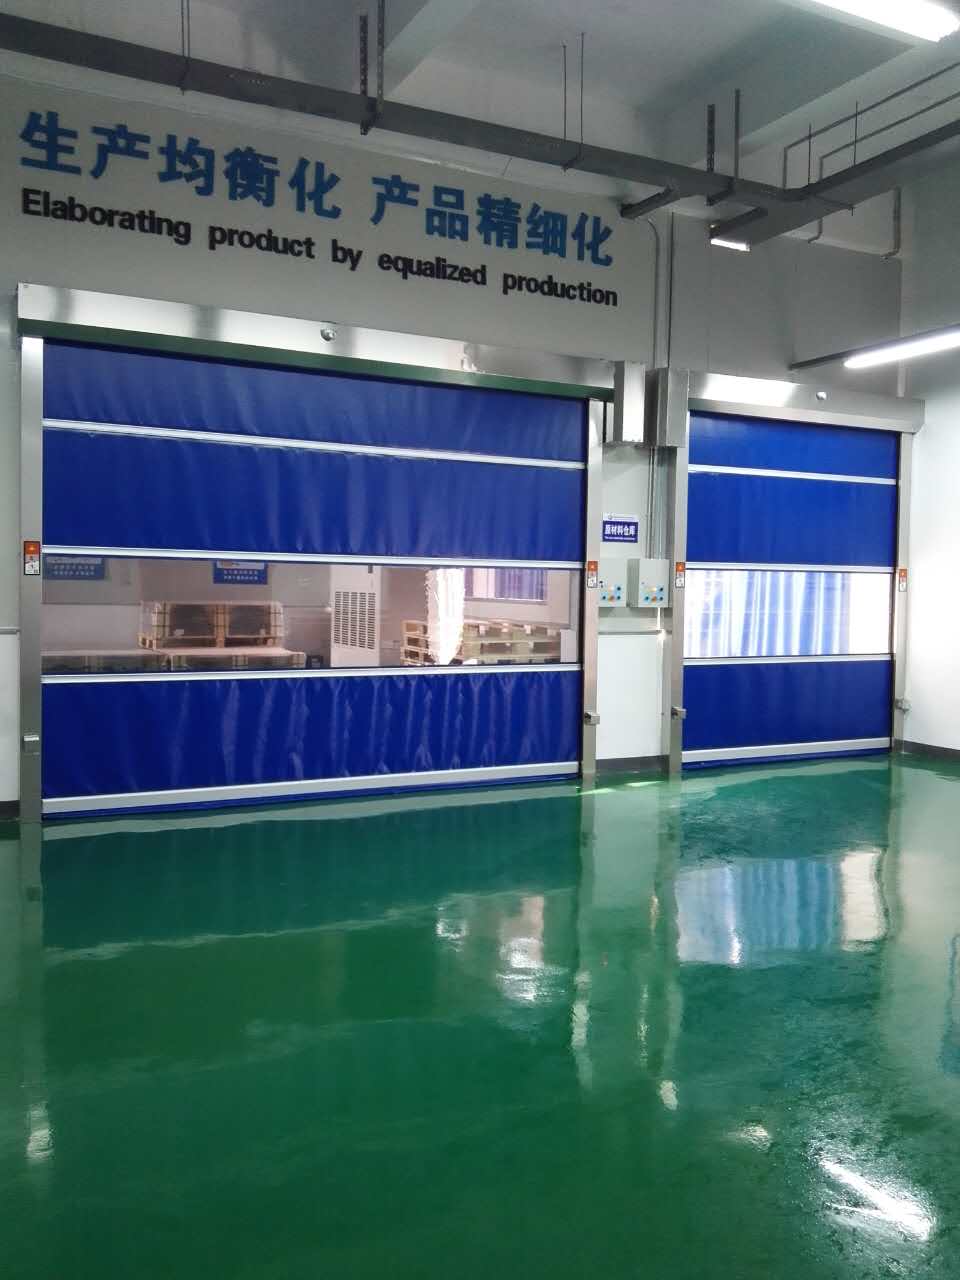 Industrial Automatic PVC Fabric Fast Rolling Door